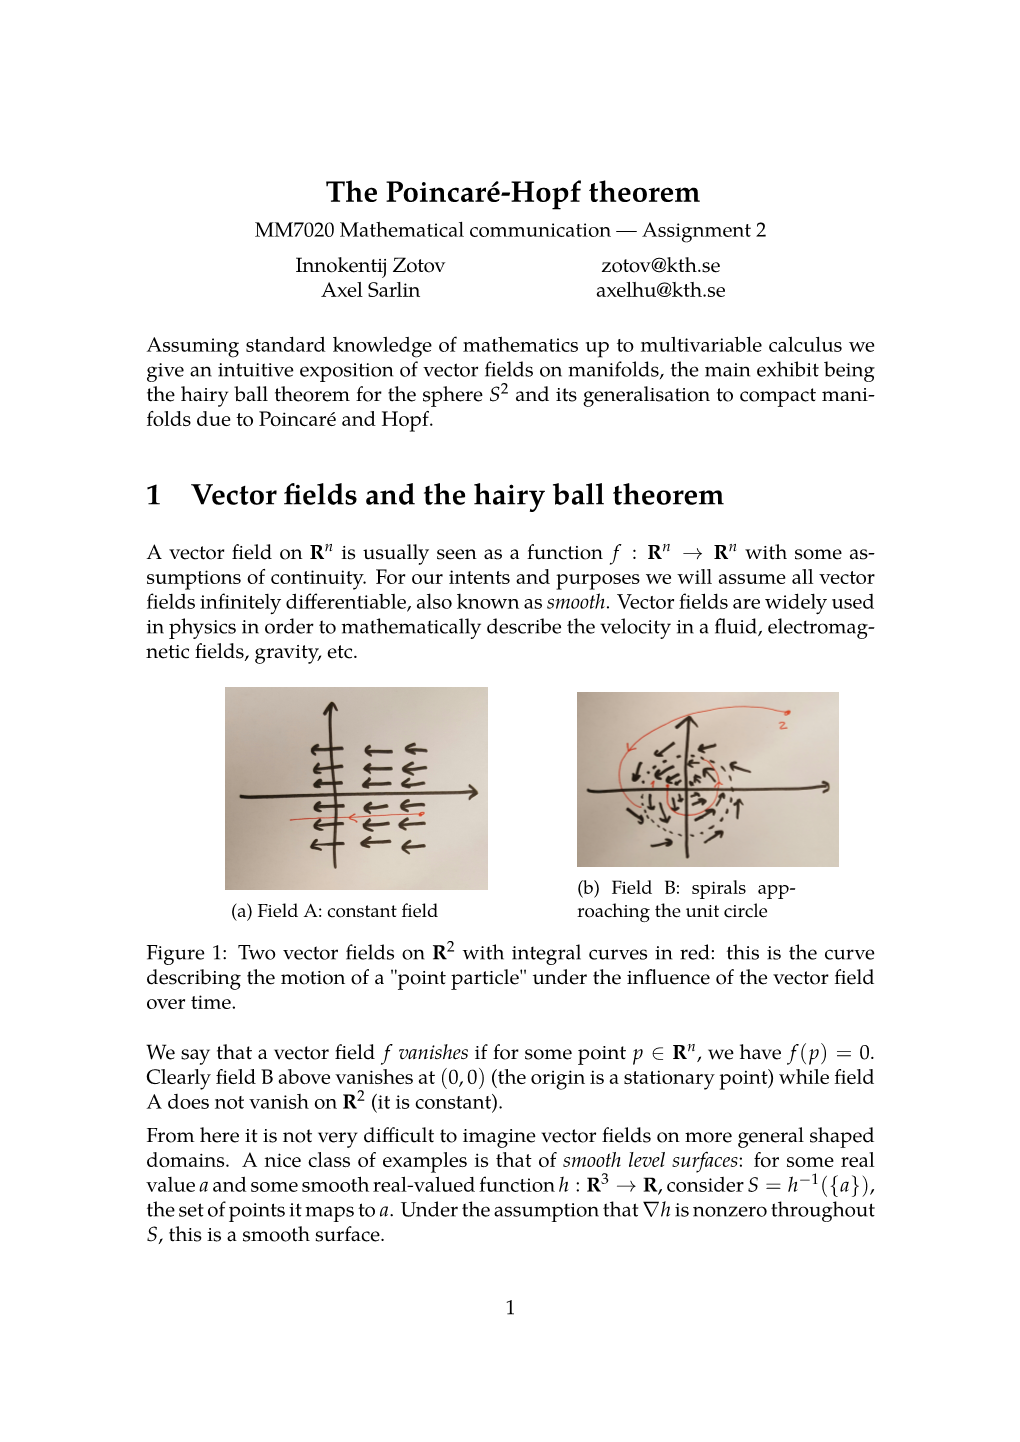 The Poincaré-Hopf Theorem 1 Vector Fields and the Hairy Ball Theorem